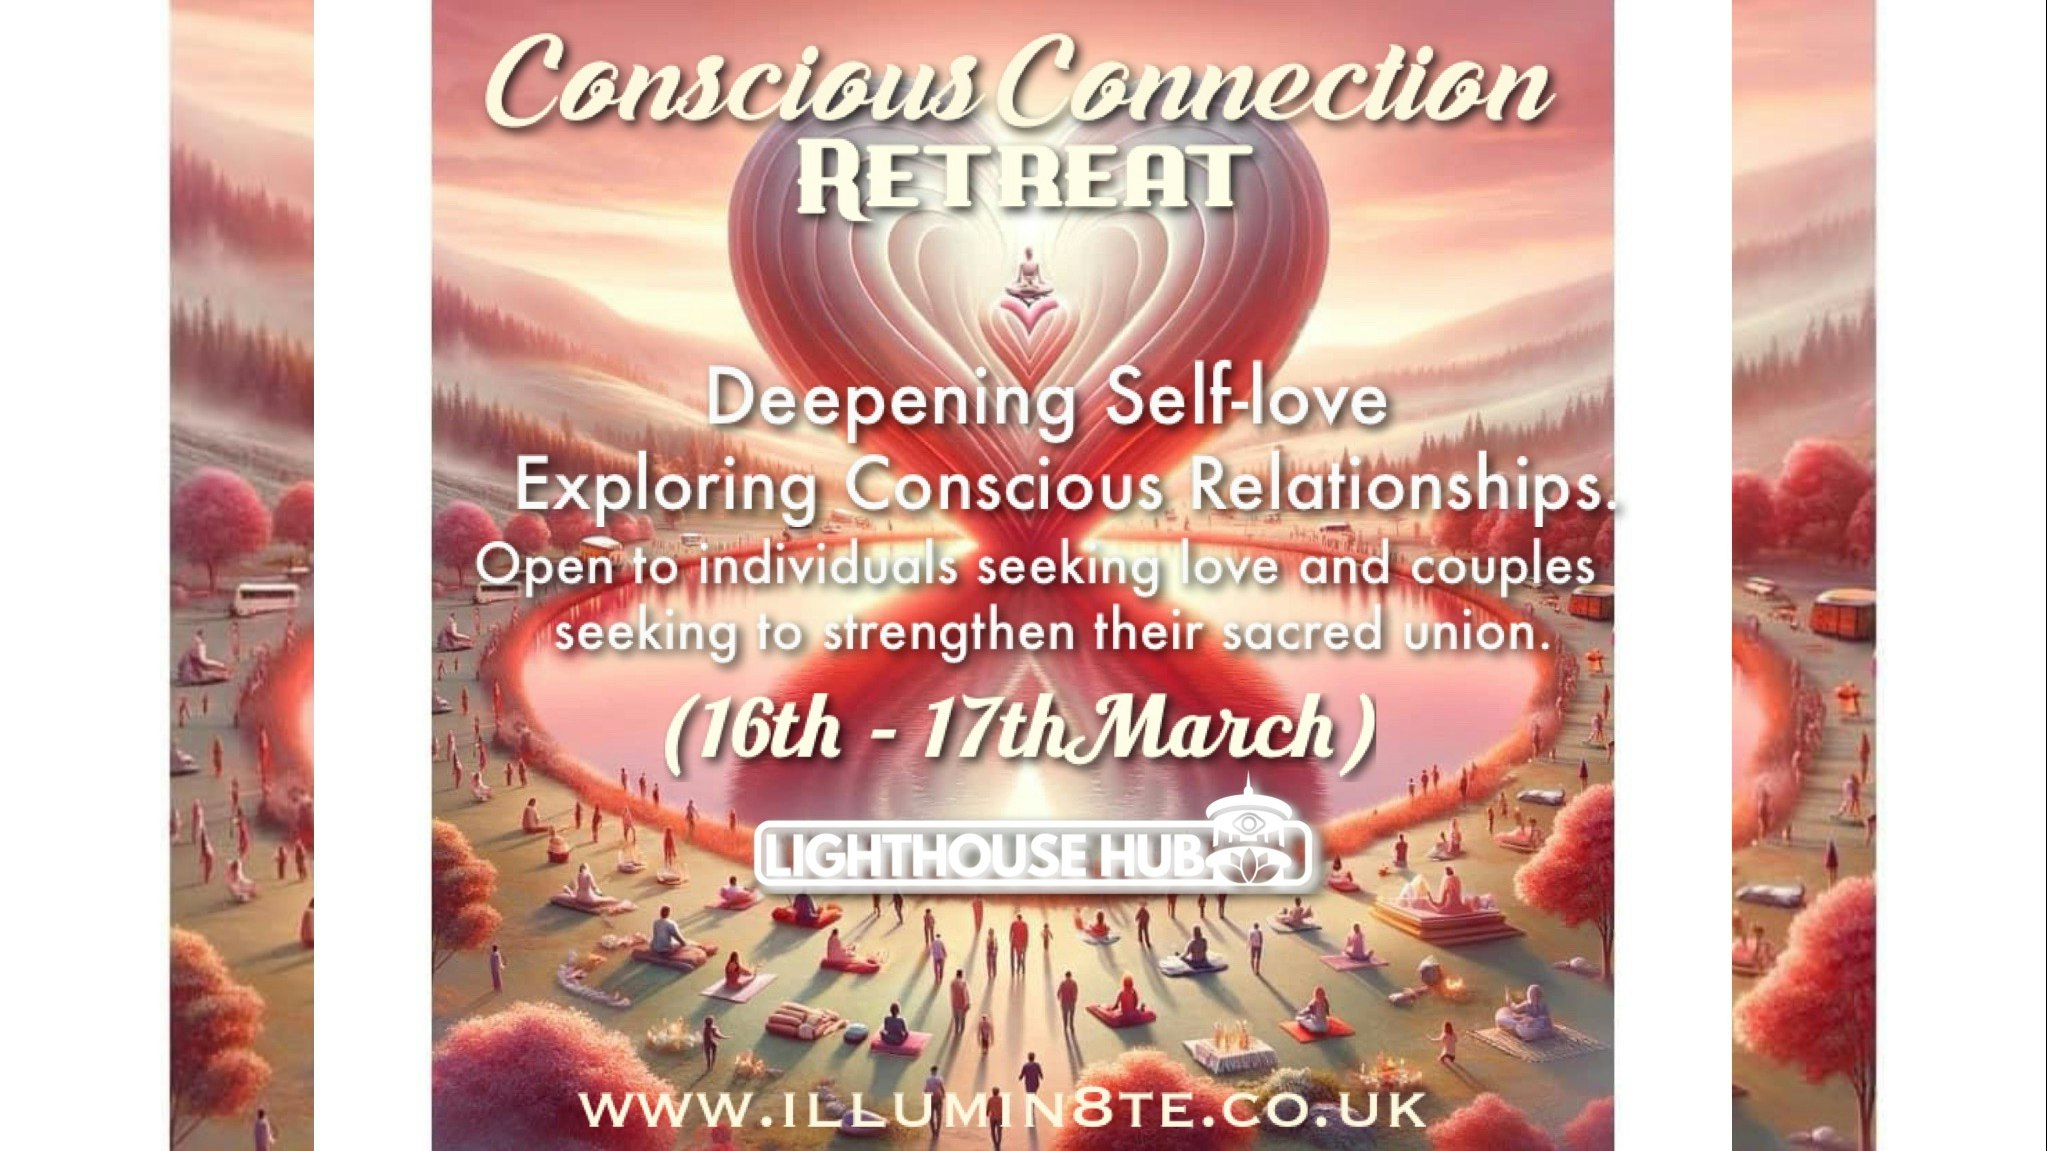 Conscious Connections Retreat (Saturday 16th – Sunday 17th March) @ The Lighthouse Hub